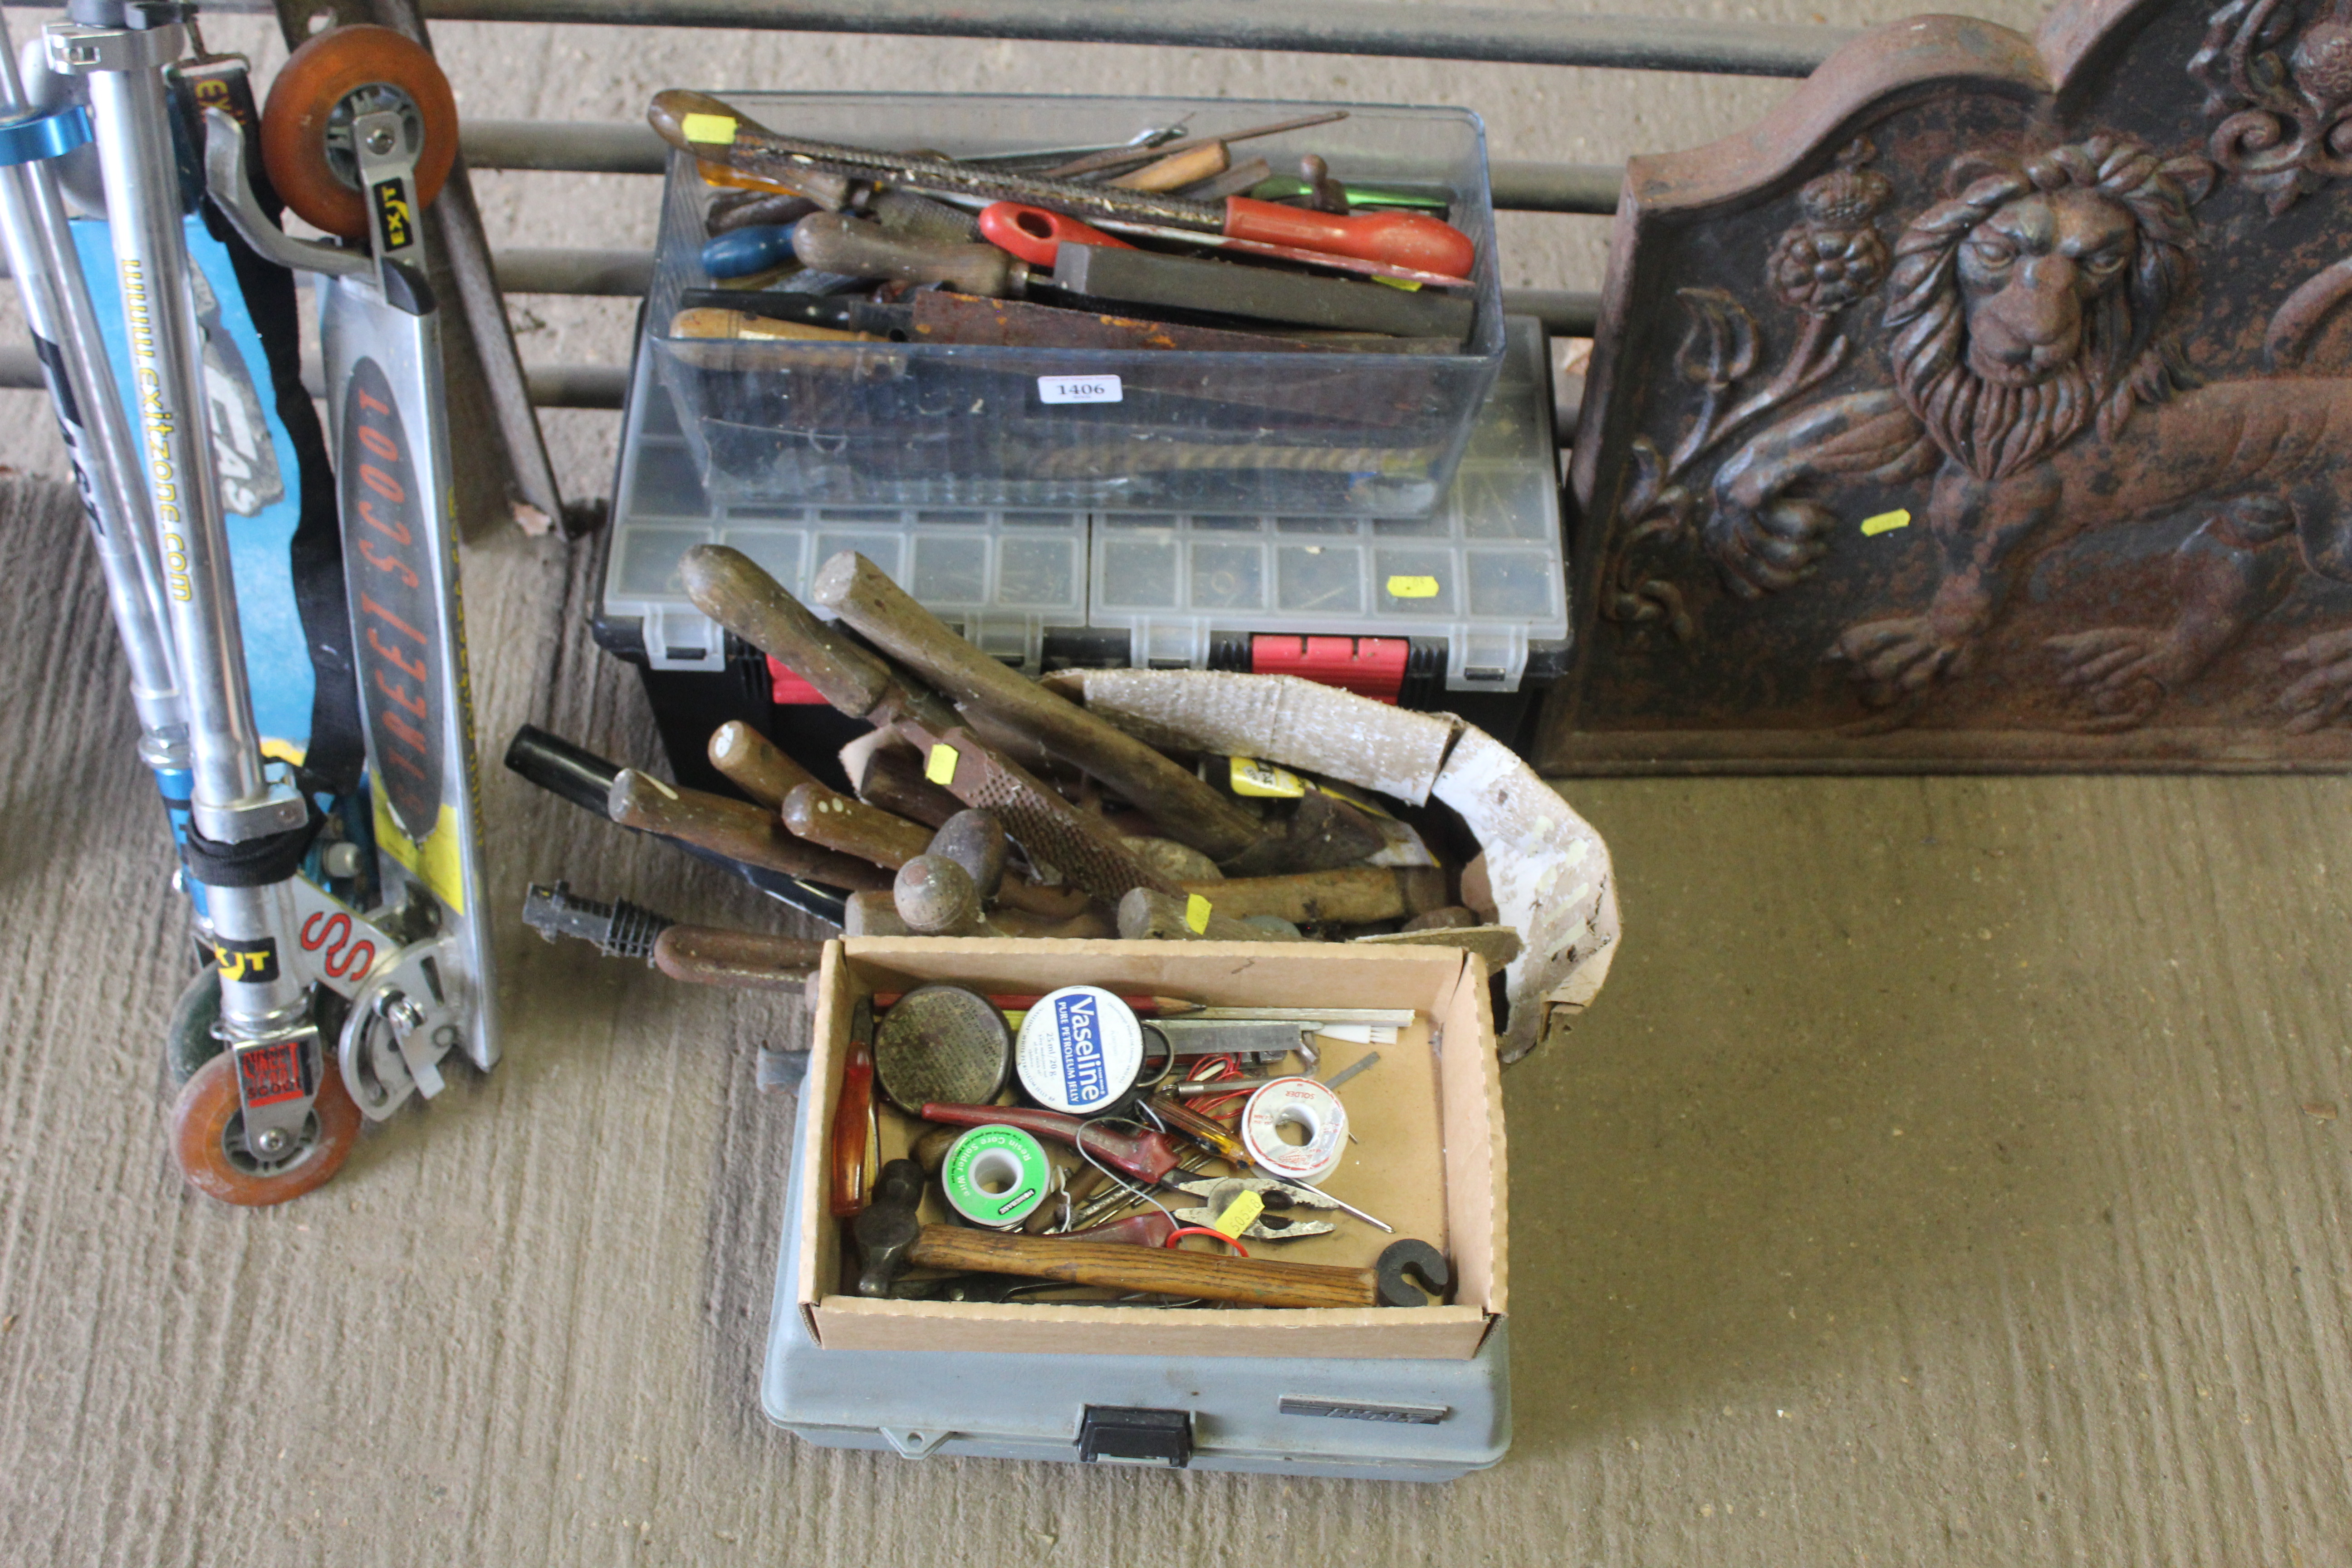 A quantity of various tools and plastic tool boxes